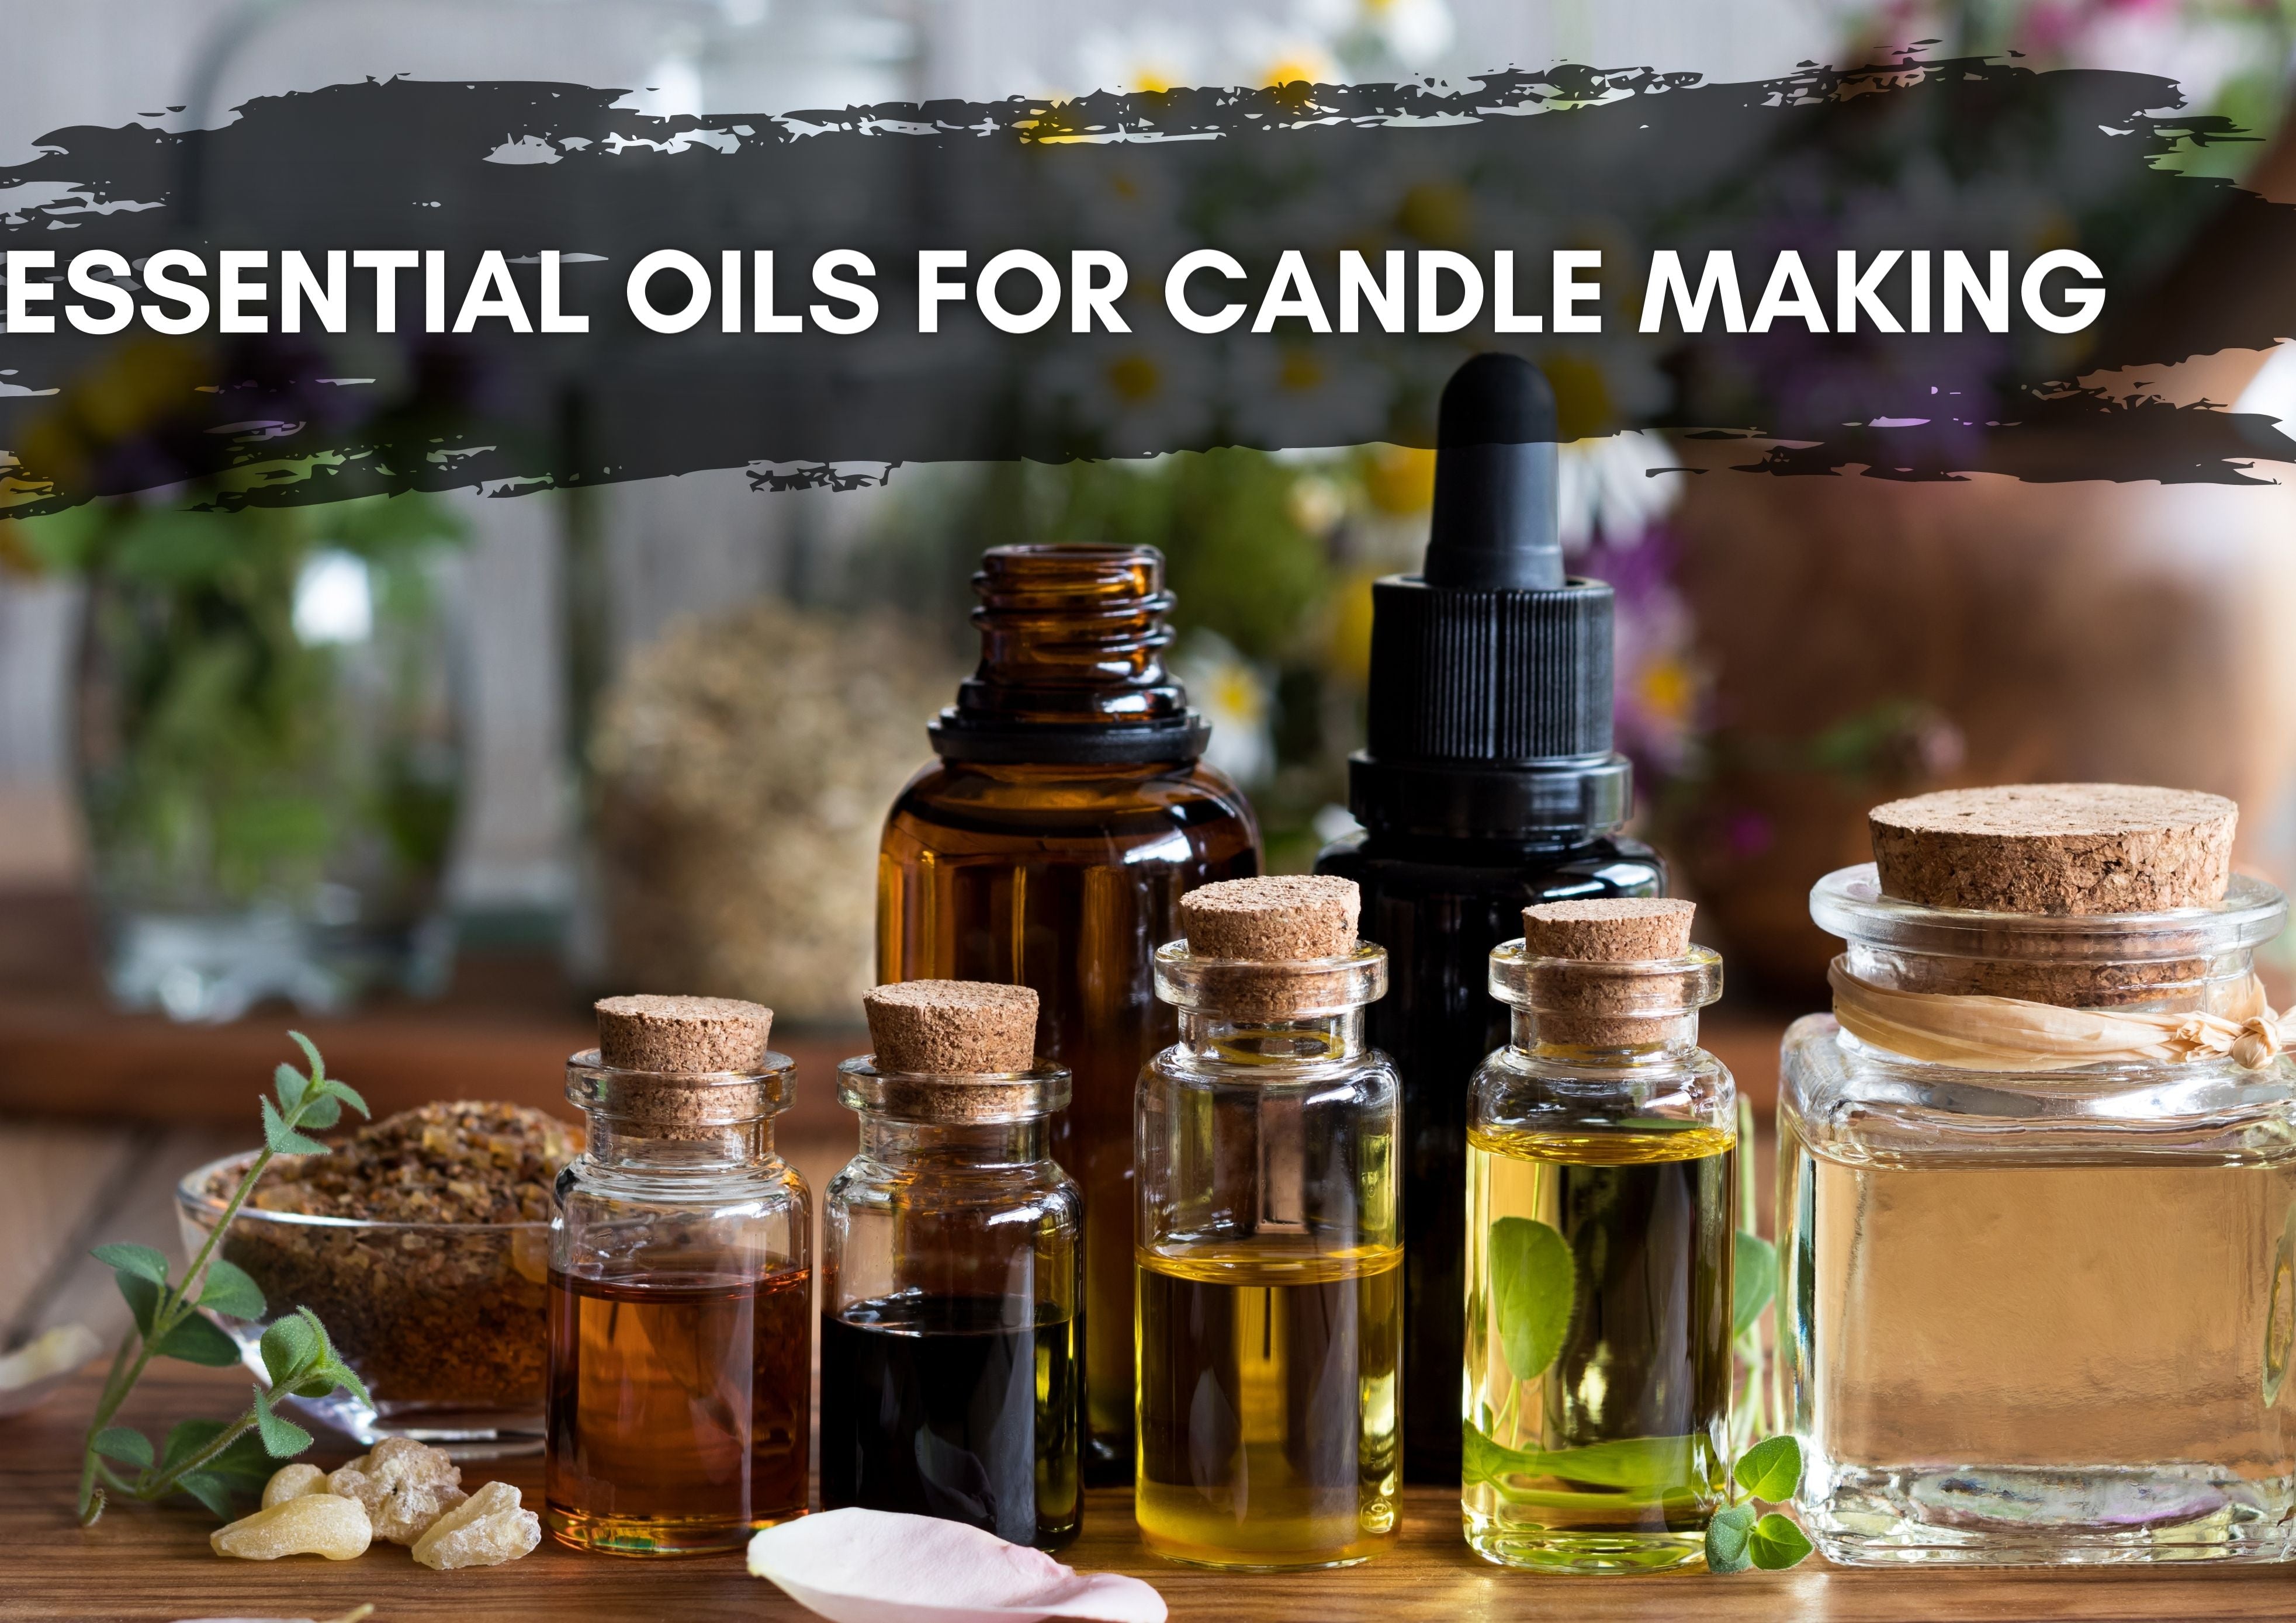 Fragrances Oils vs. Essential Oils in Candles: What's the